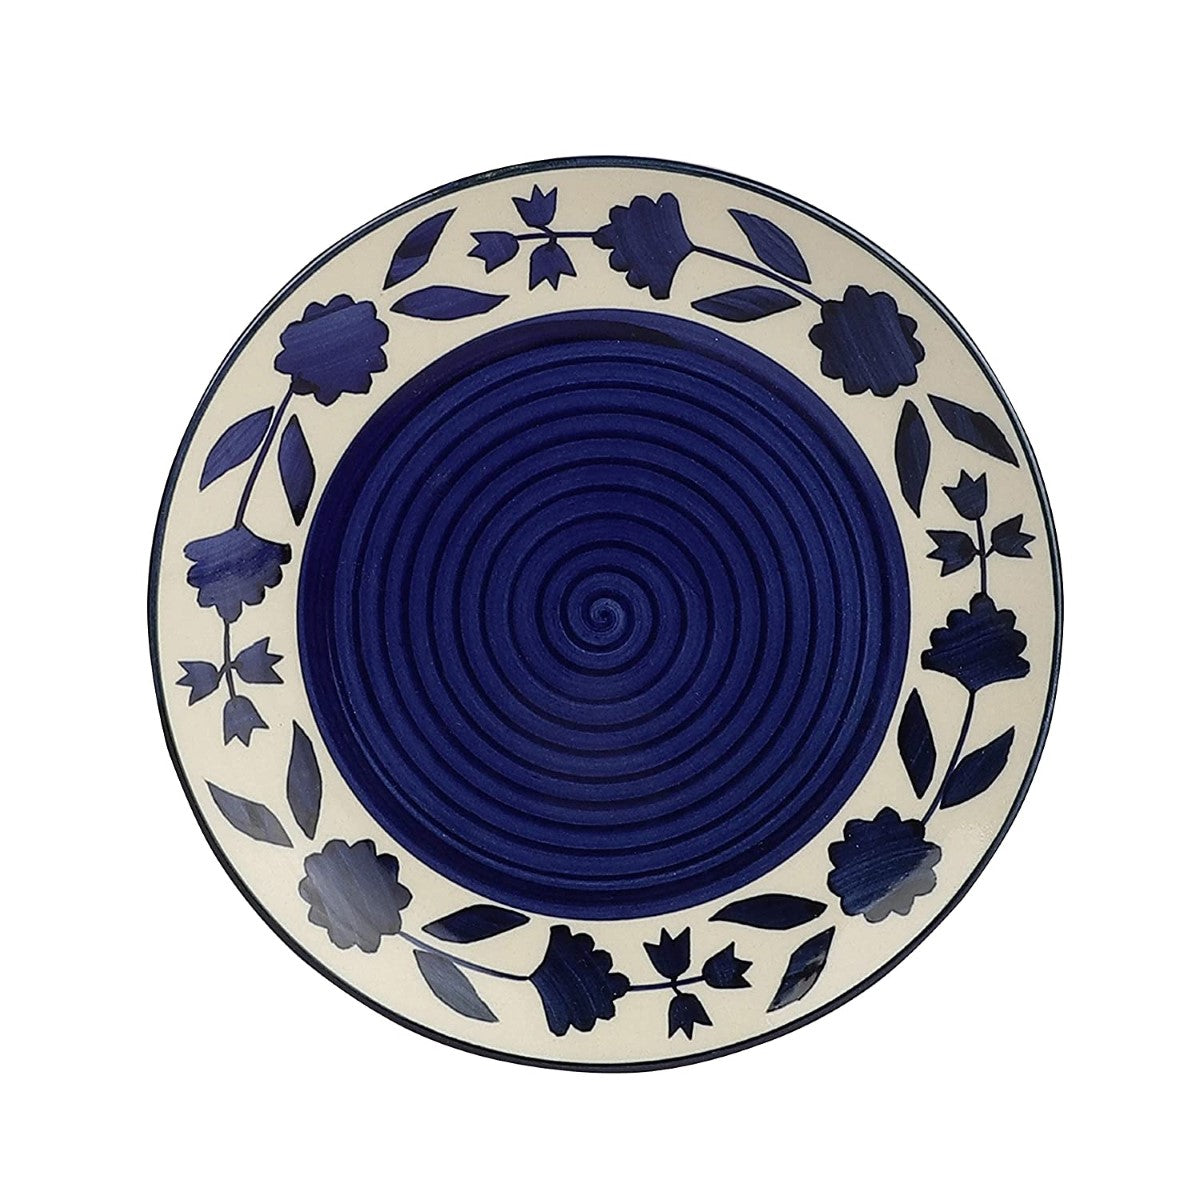 Floral Blue And White Ceramic Plates For Dinner (Set of 4)